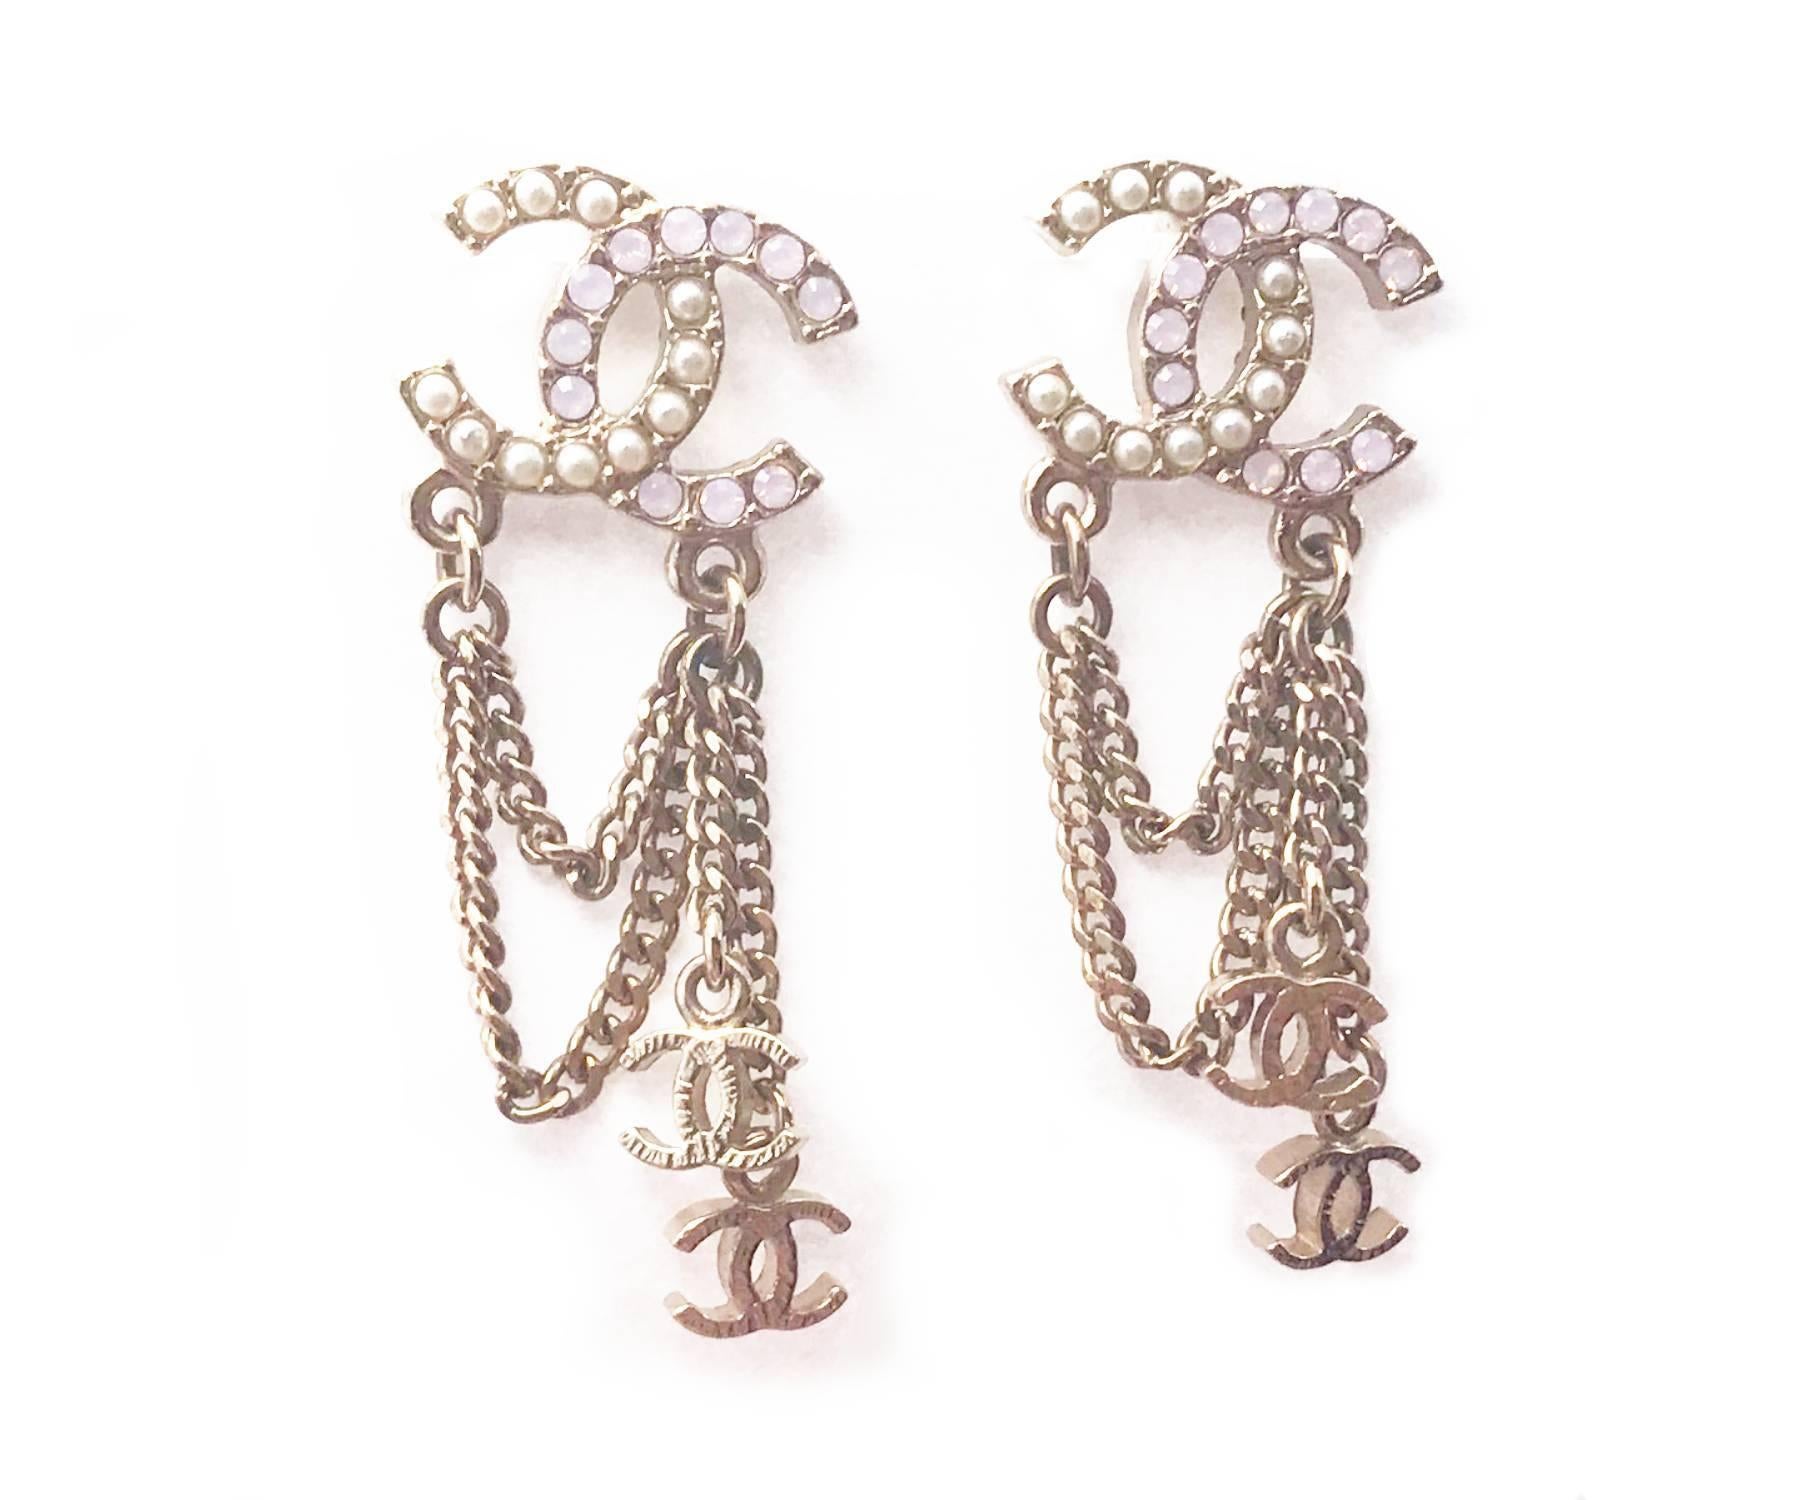 Chanel Gold CC Pastel Pink Crystal Pearl Chain Dangle Piercing Earrings

*Marked 12
*Made in France
*Comes with the original box

-It is approximately 1.74